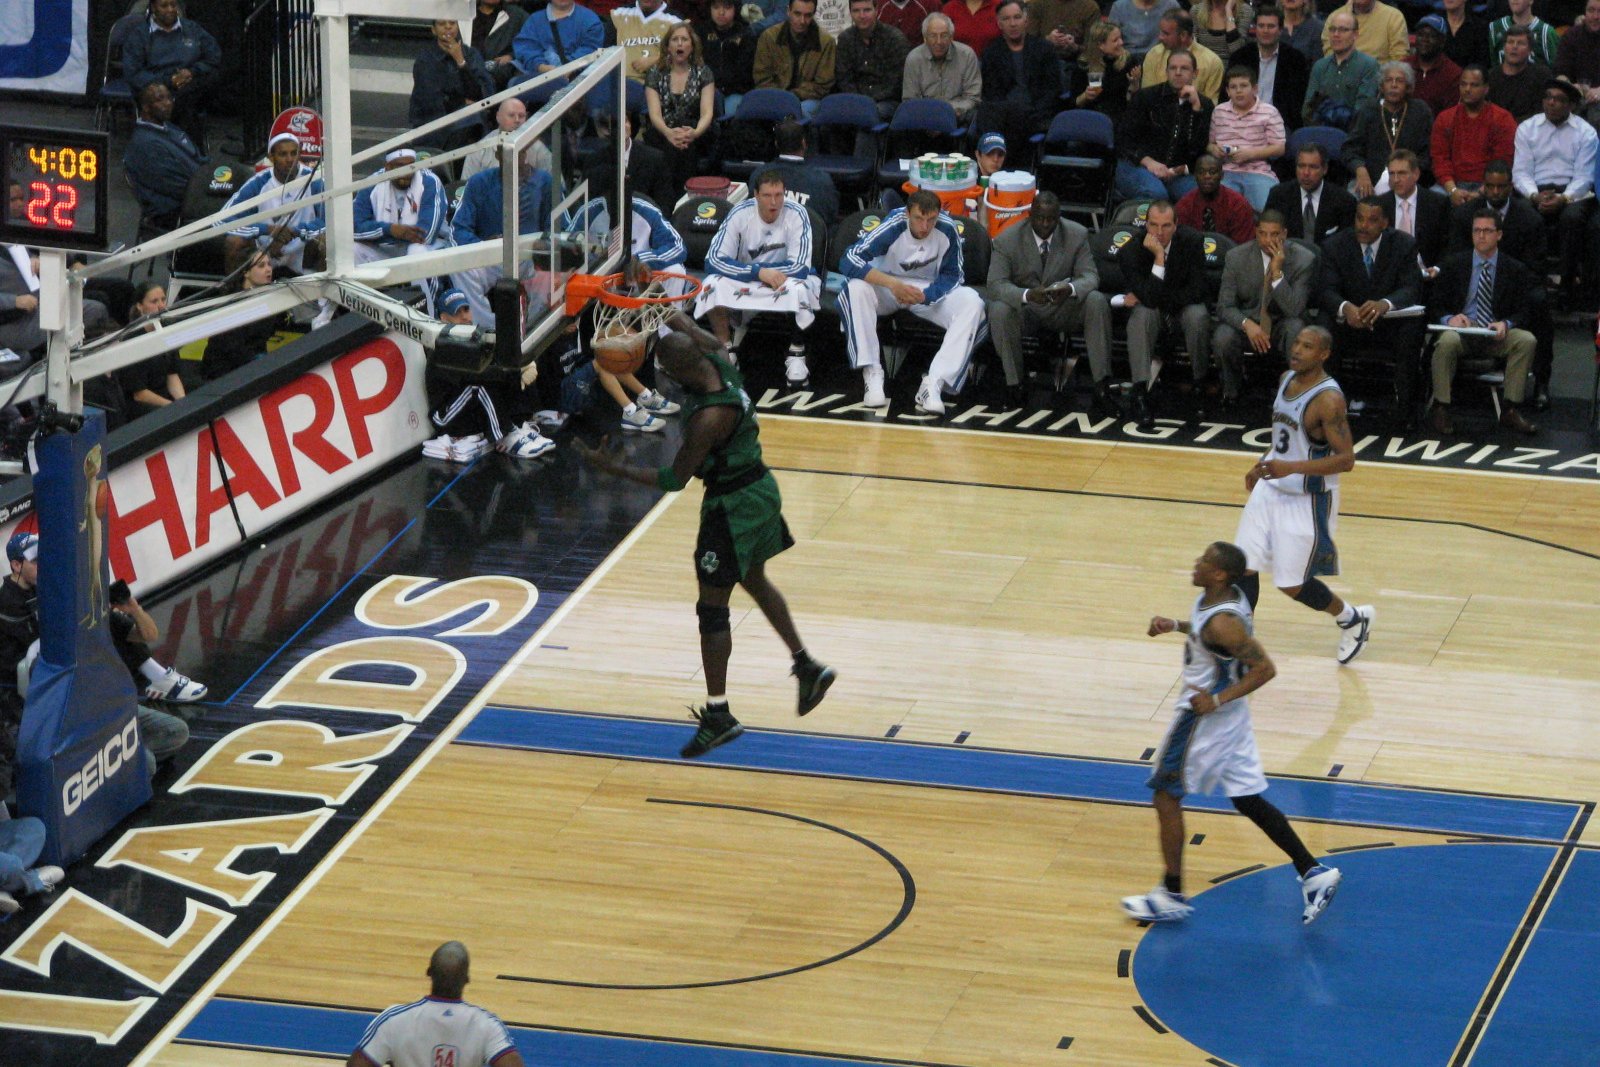 an image of a basketball game with the hoop being blocked